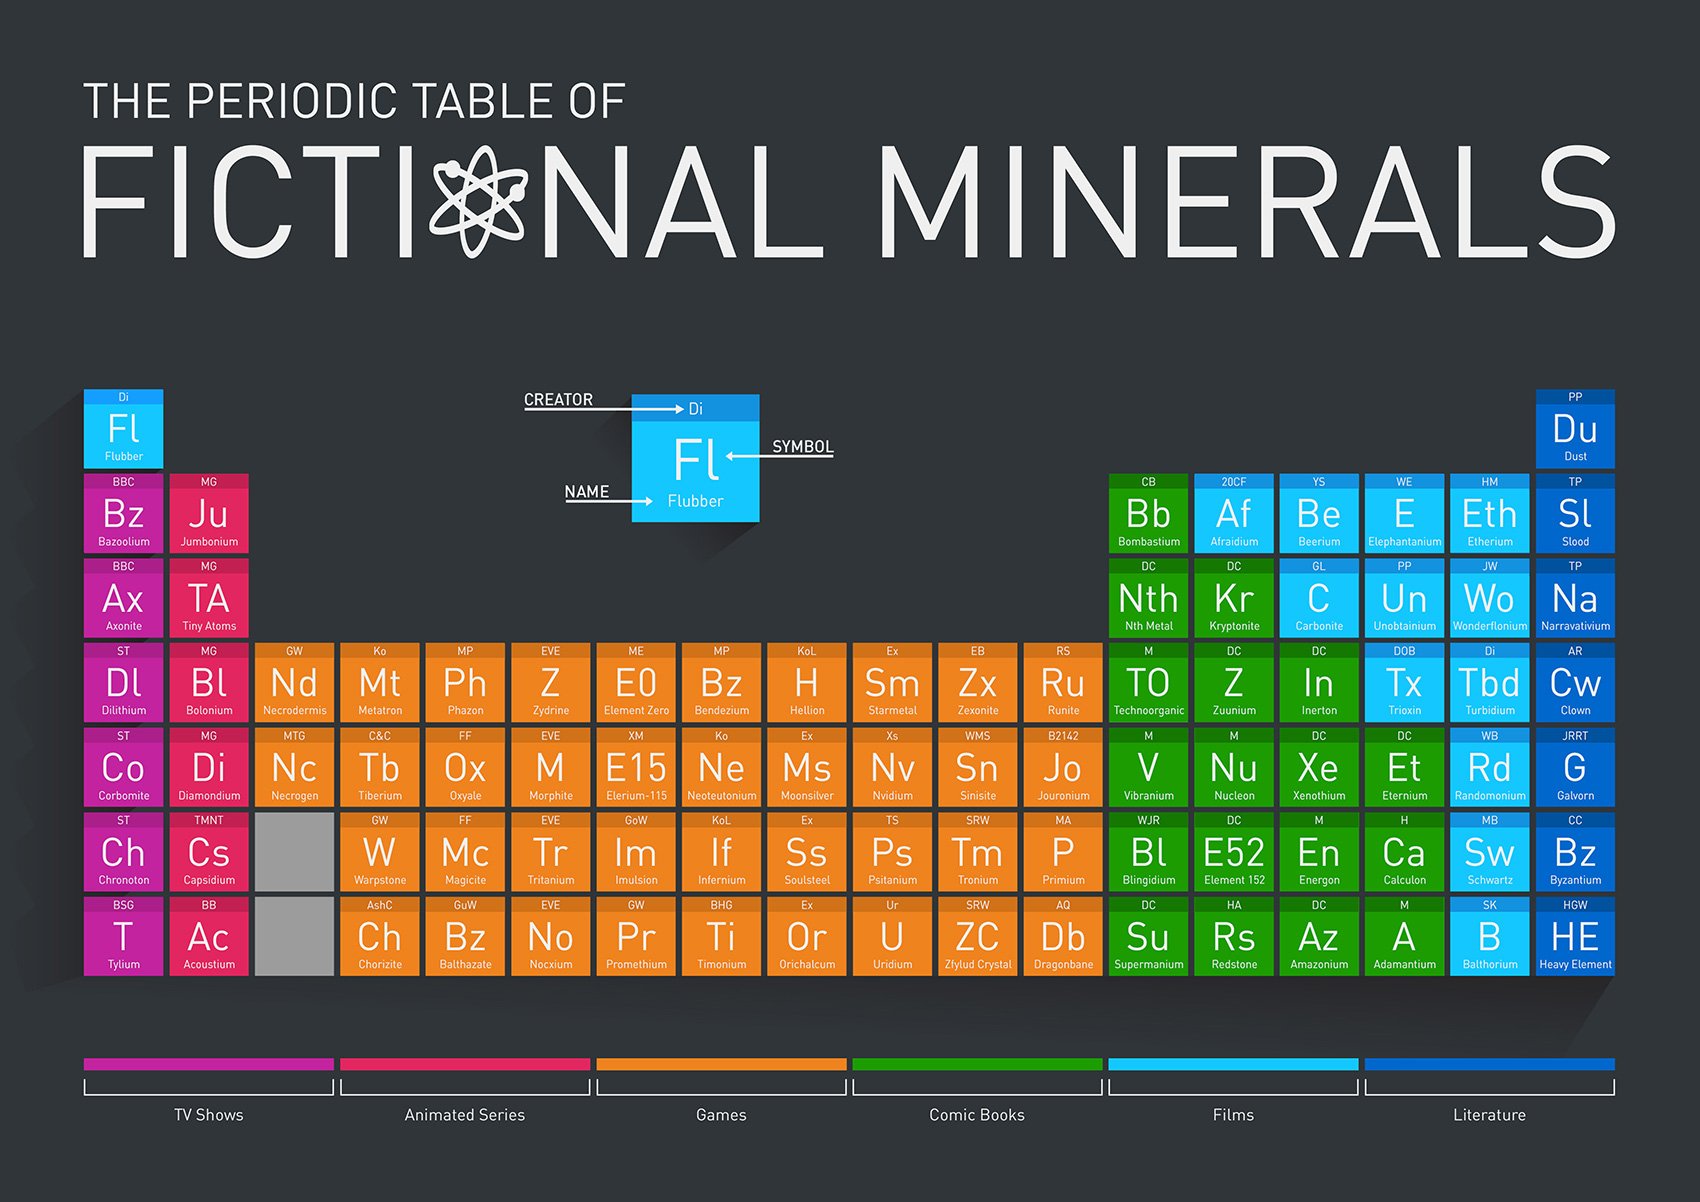 elements, Chemistry, Chemical, Atom, Science, Poster, Nature, Poster Wallpaper